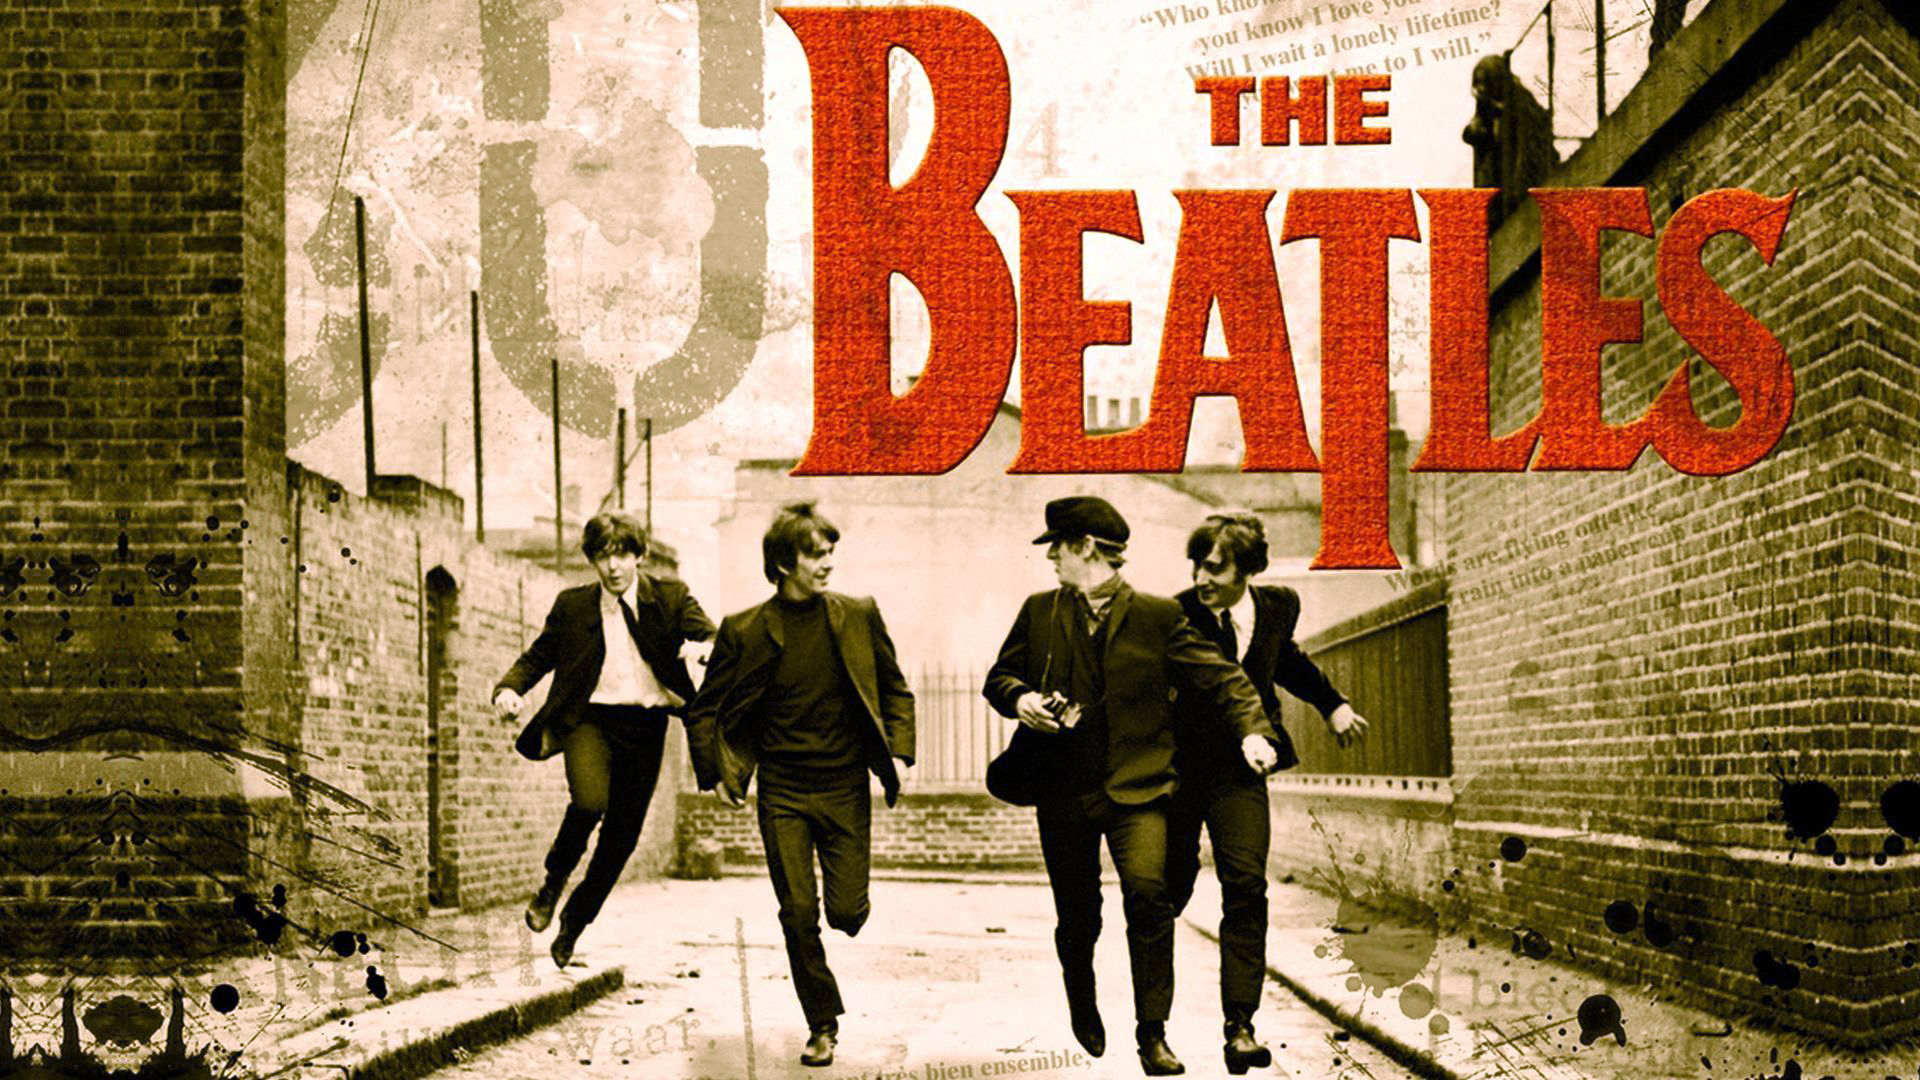 the beatles, music images